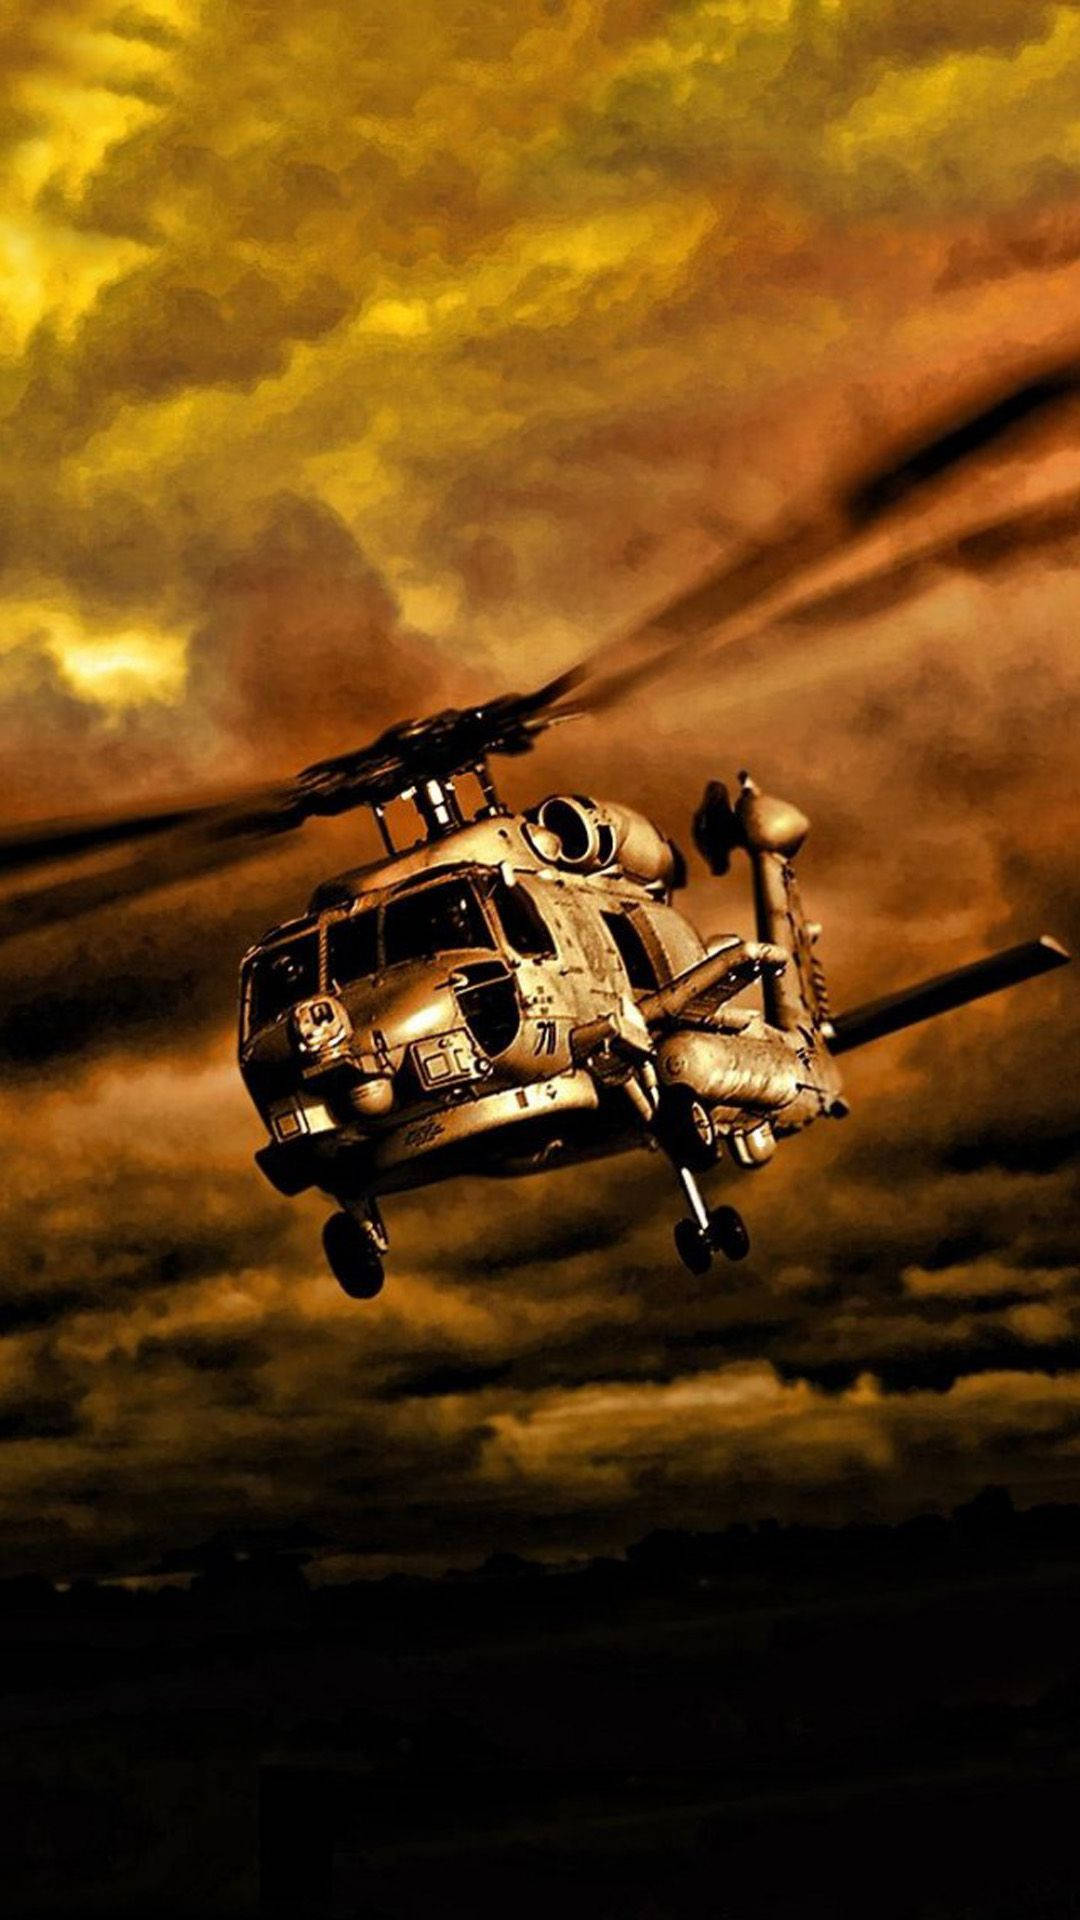 Hd Attack Military Helicopter